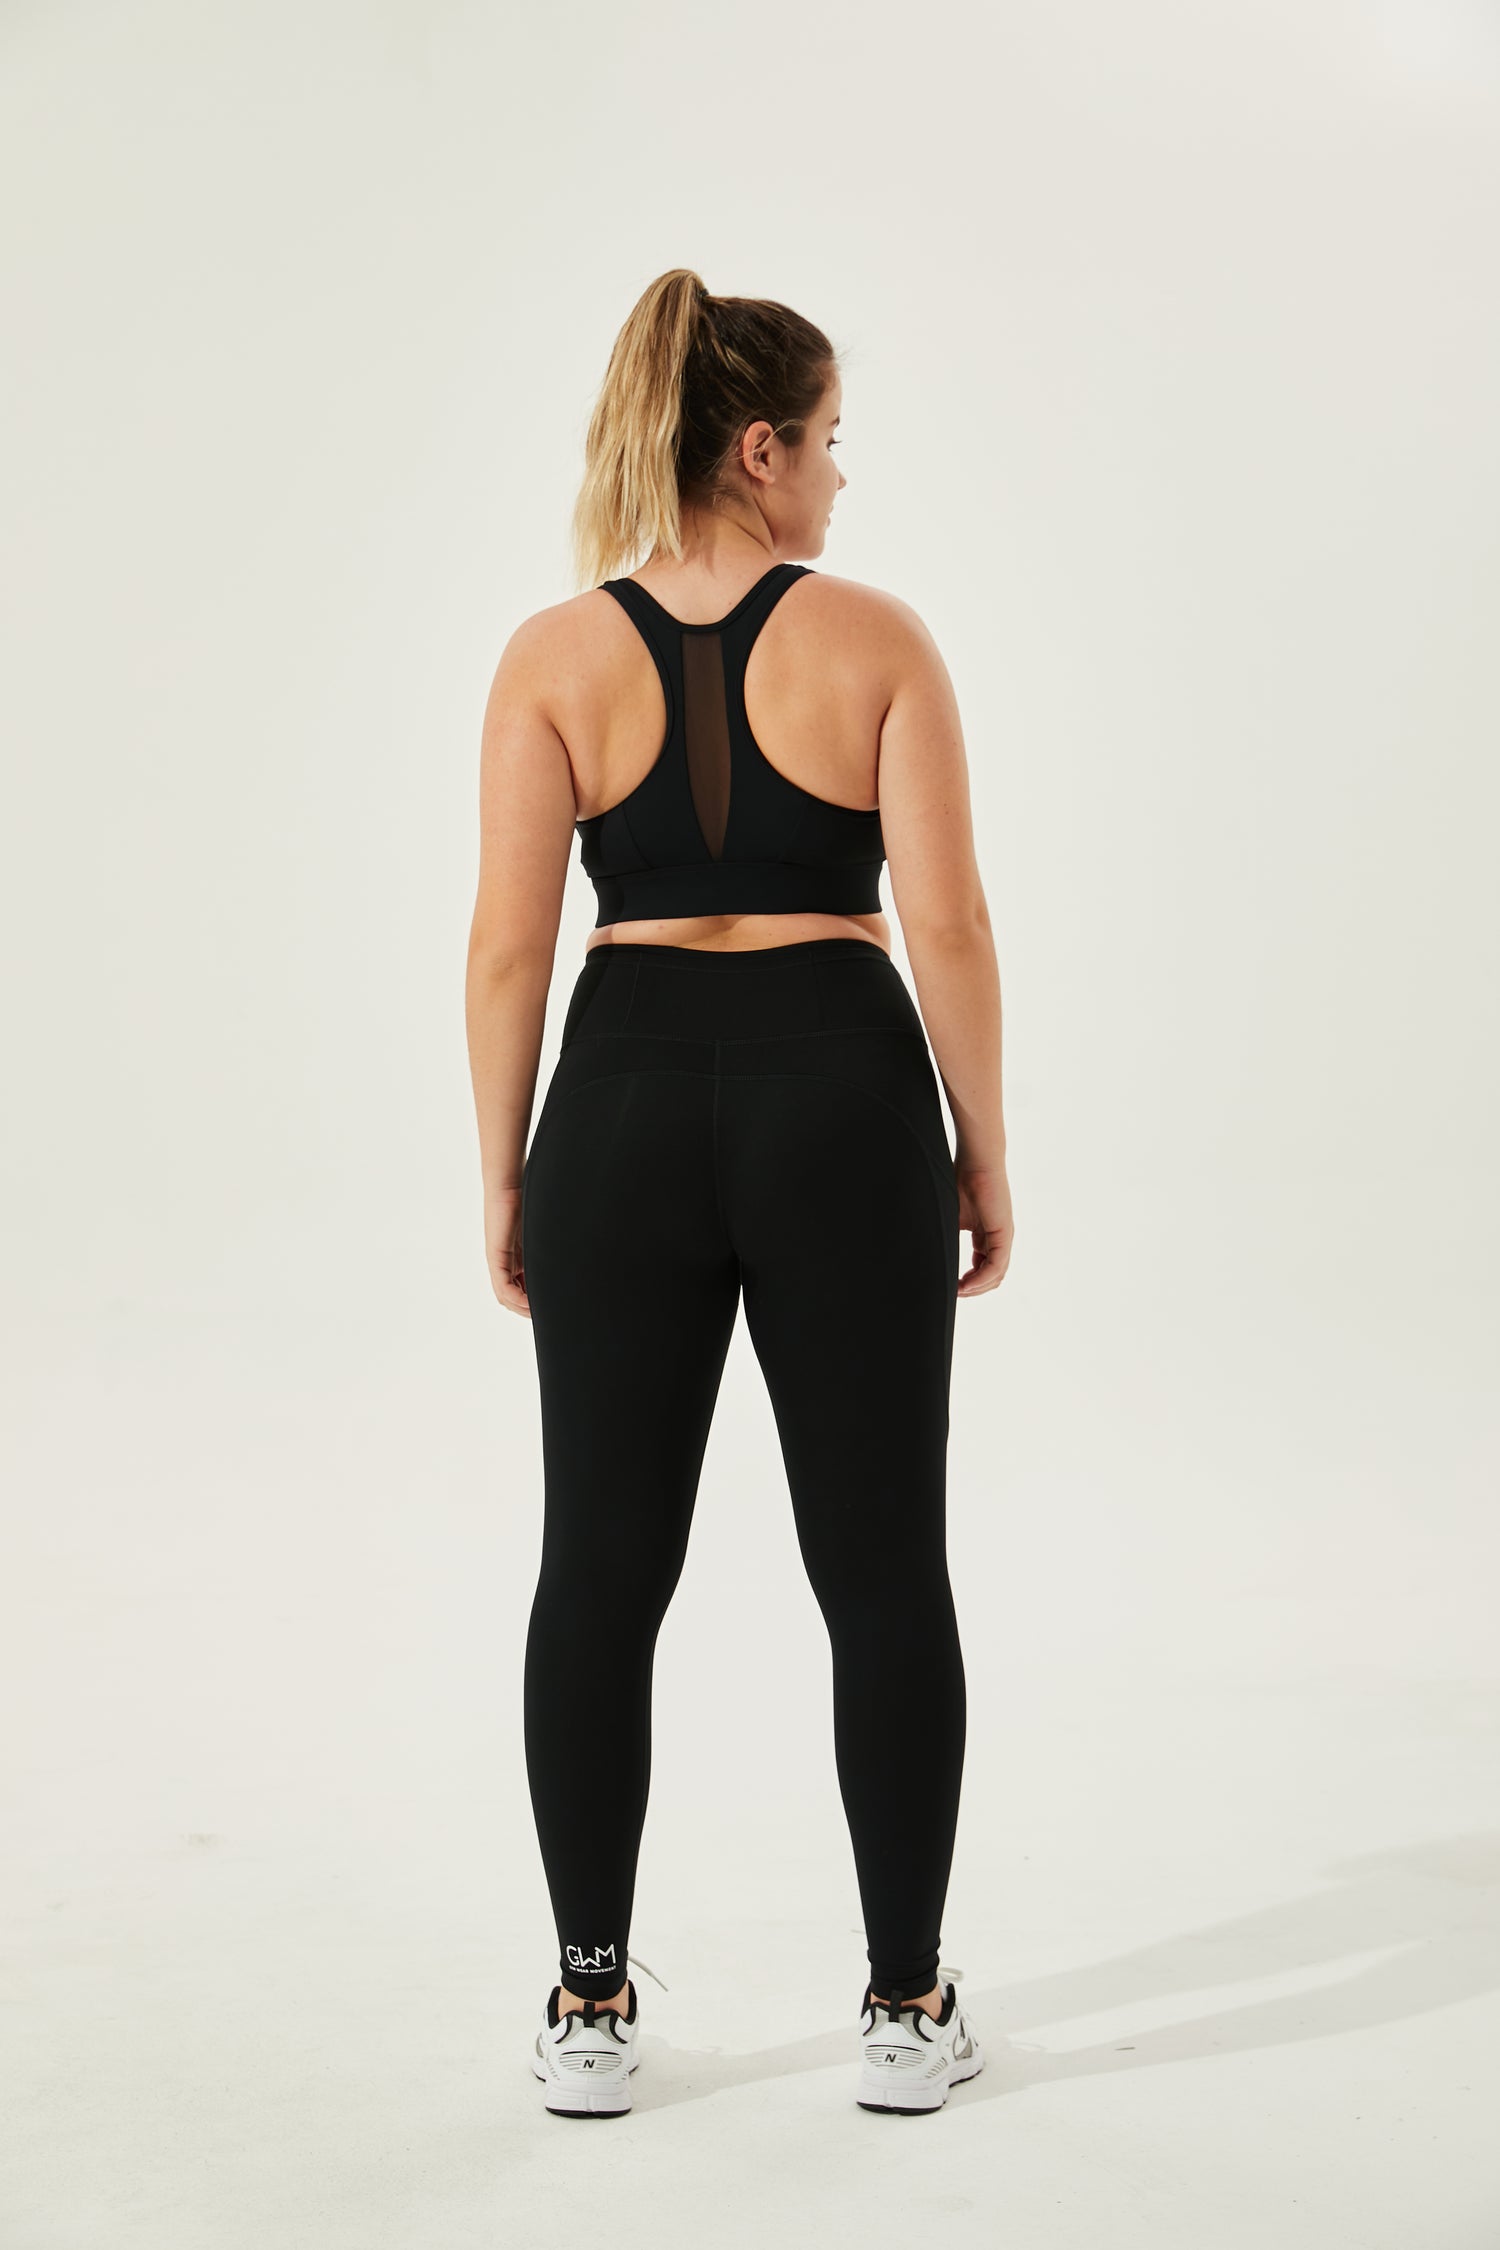 Buy 1, Get 1 Free - High-Waist Buttery Soft Camel-Toe Proof Snazzy High Intensity Leggings With 5 Pockets